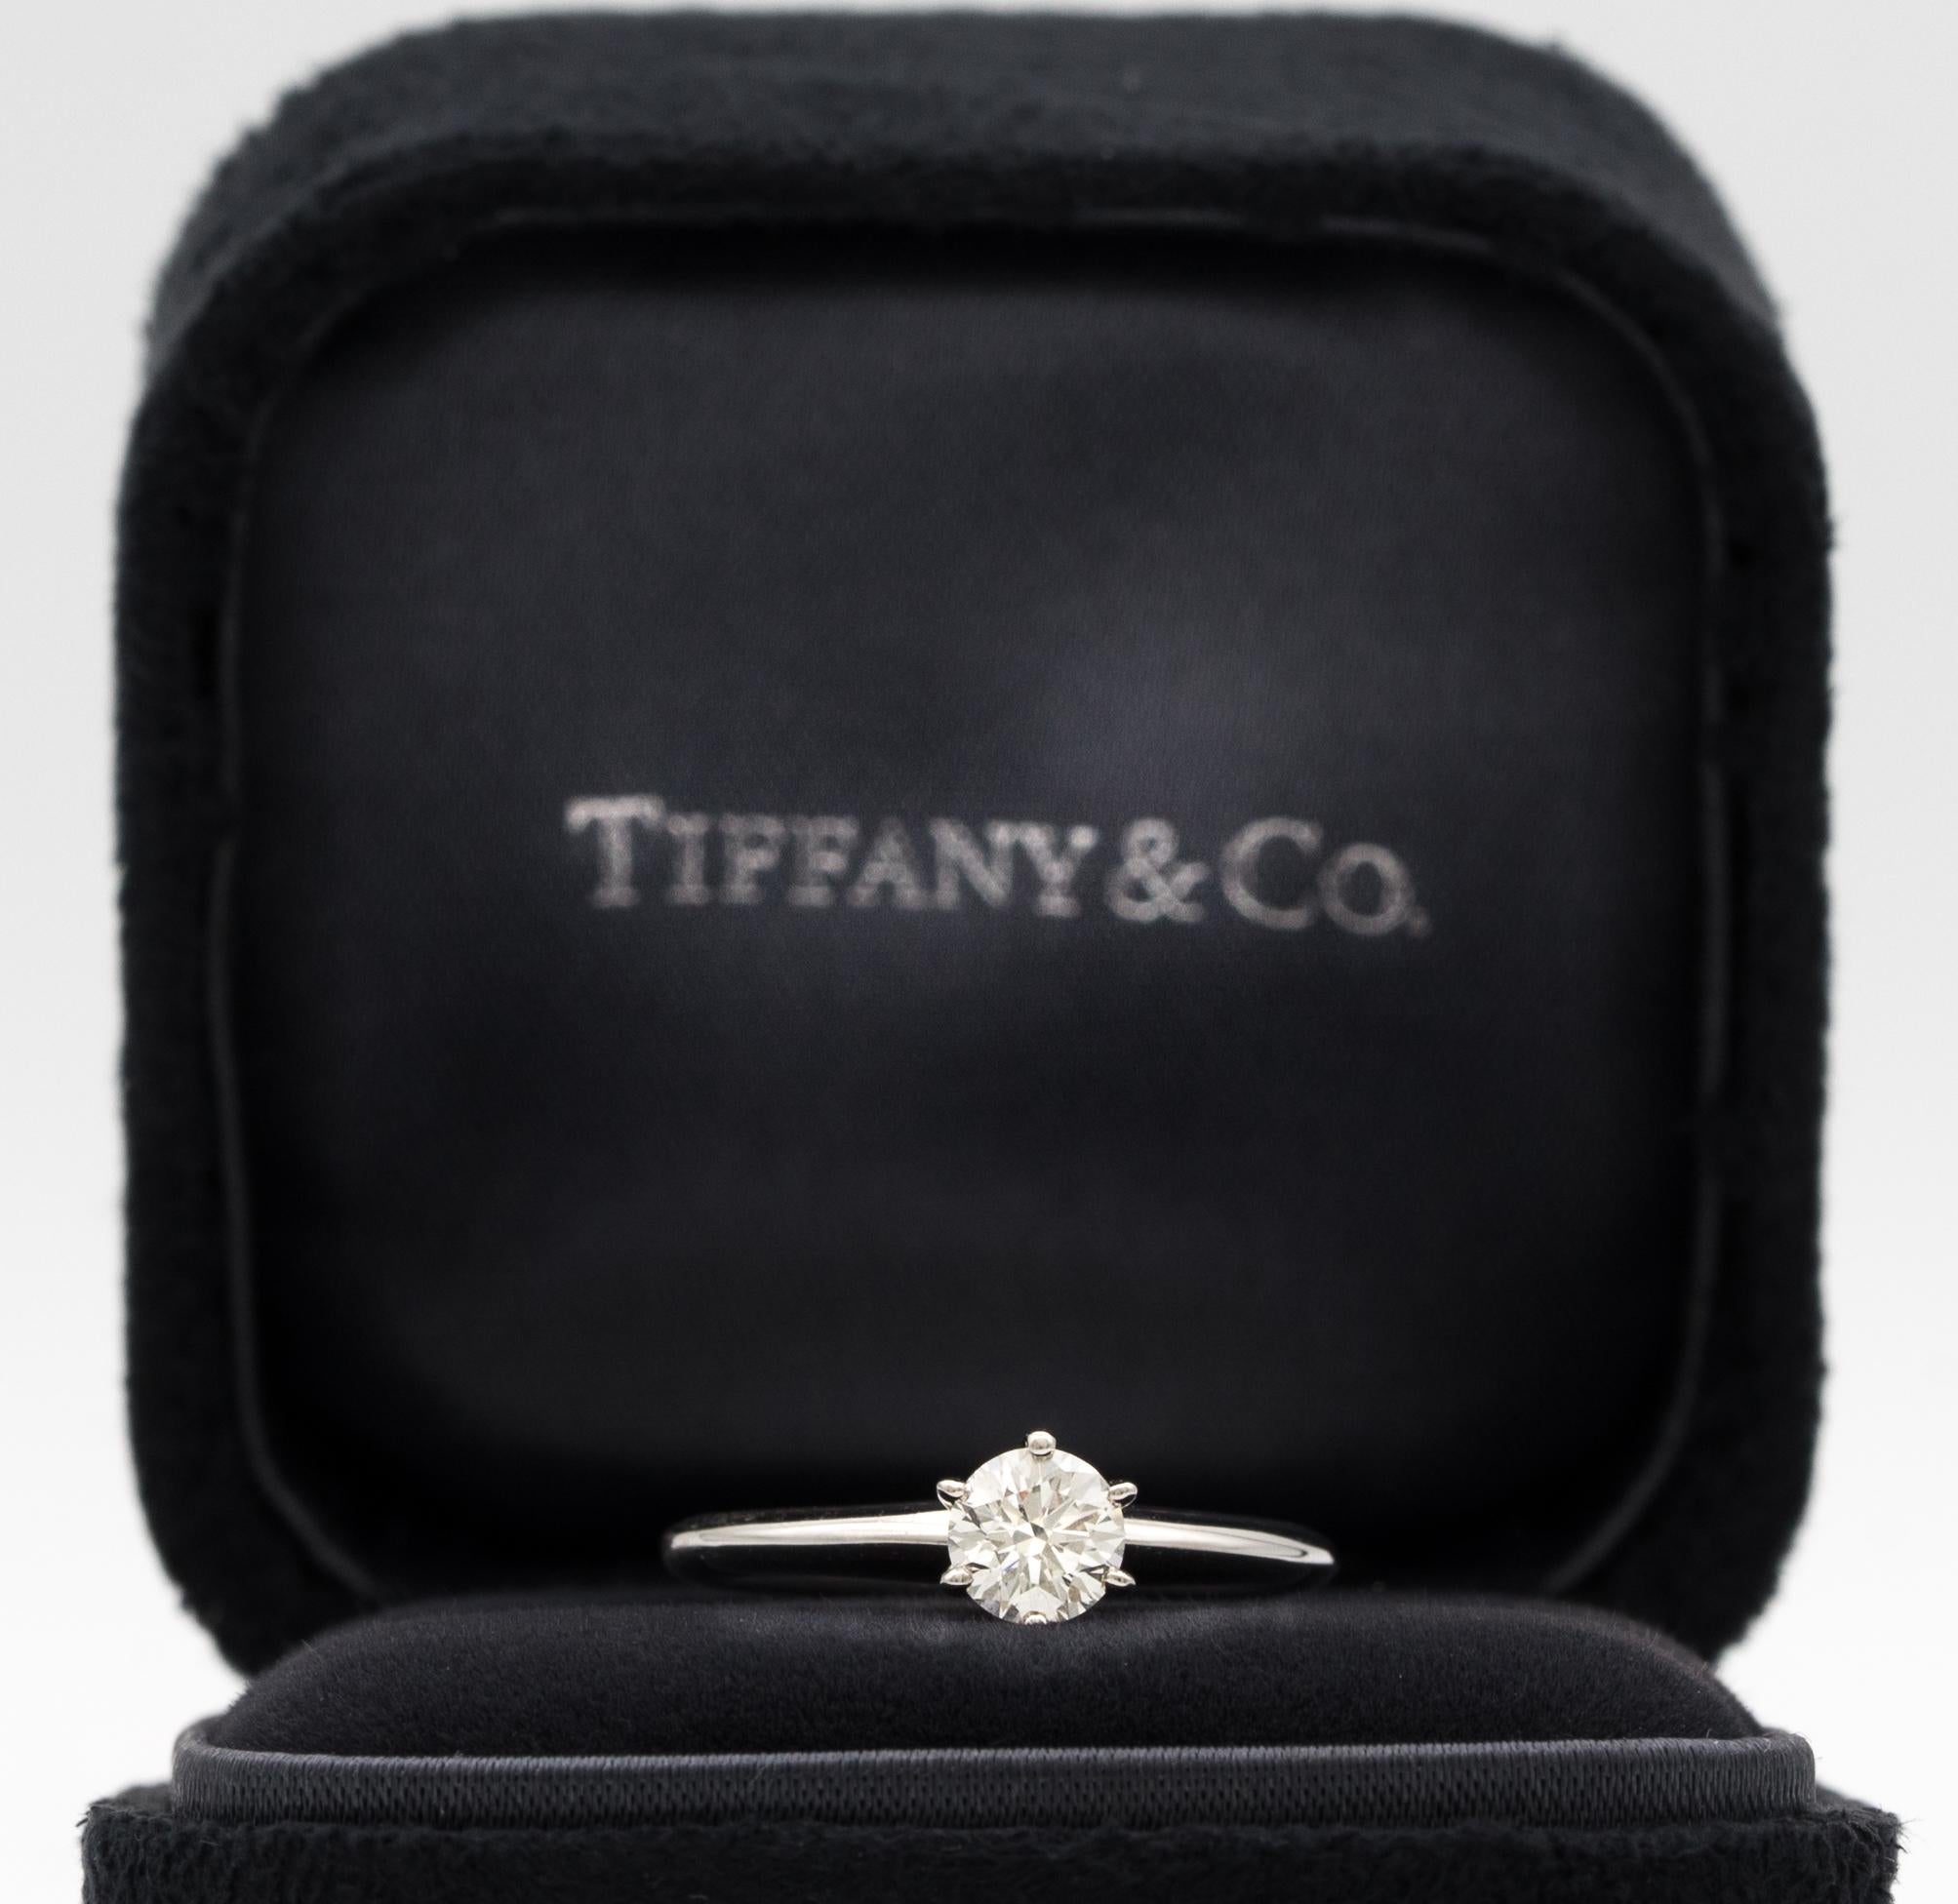 Contemporary Tiffany & Co. Engagement Ring with 1.28 Carat Centre in Platinum ($18, 200)